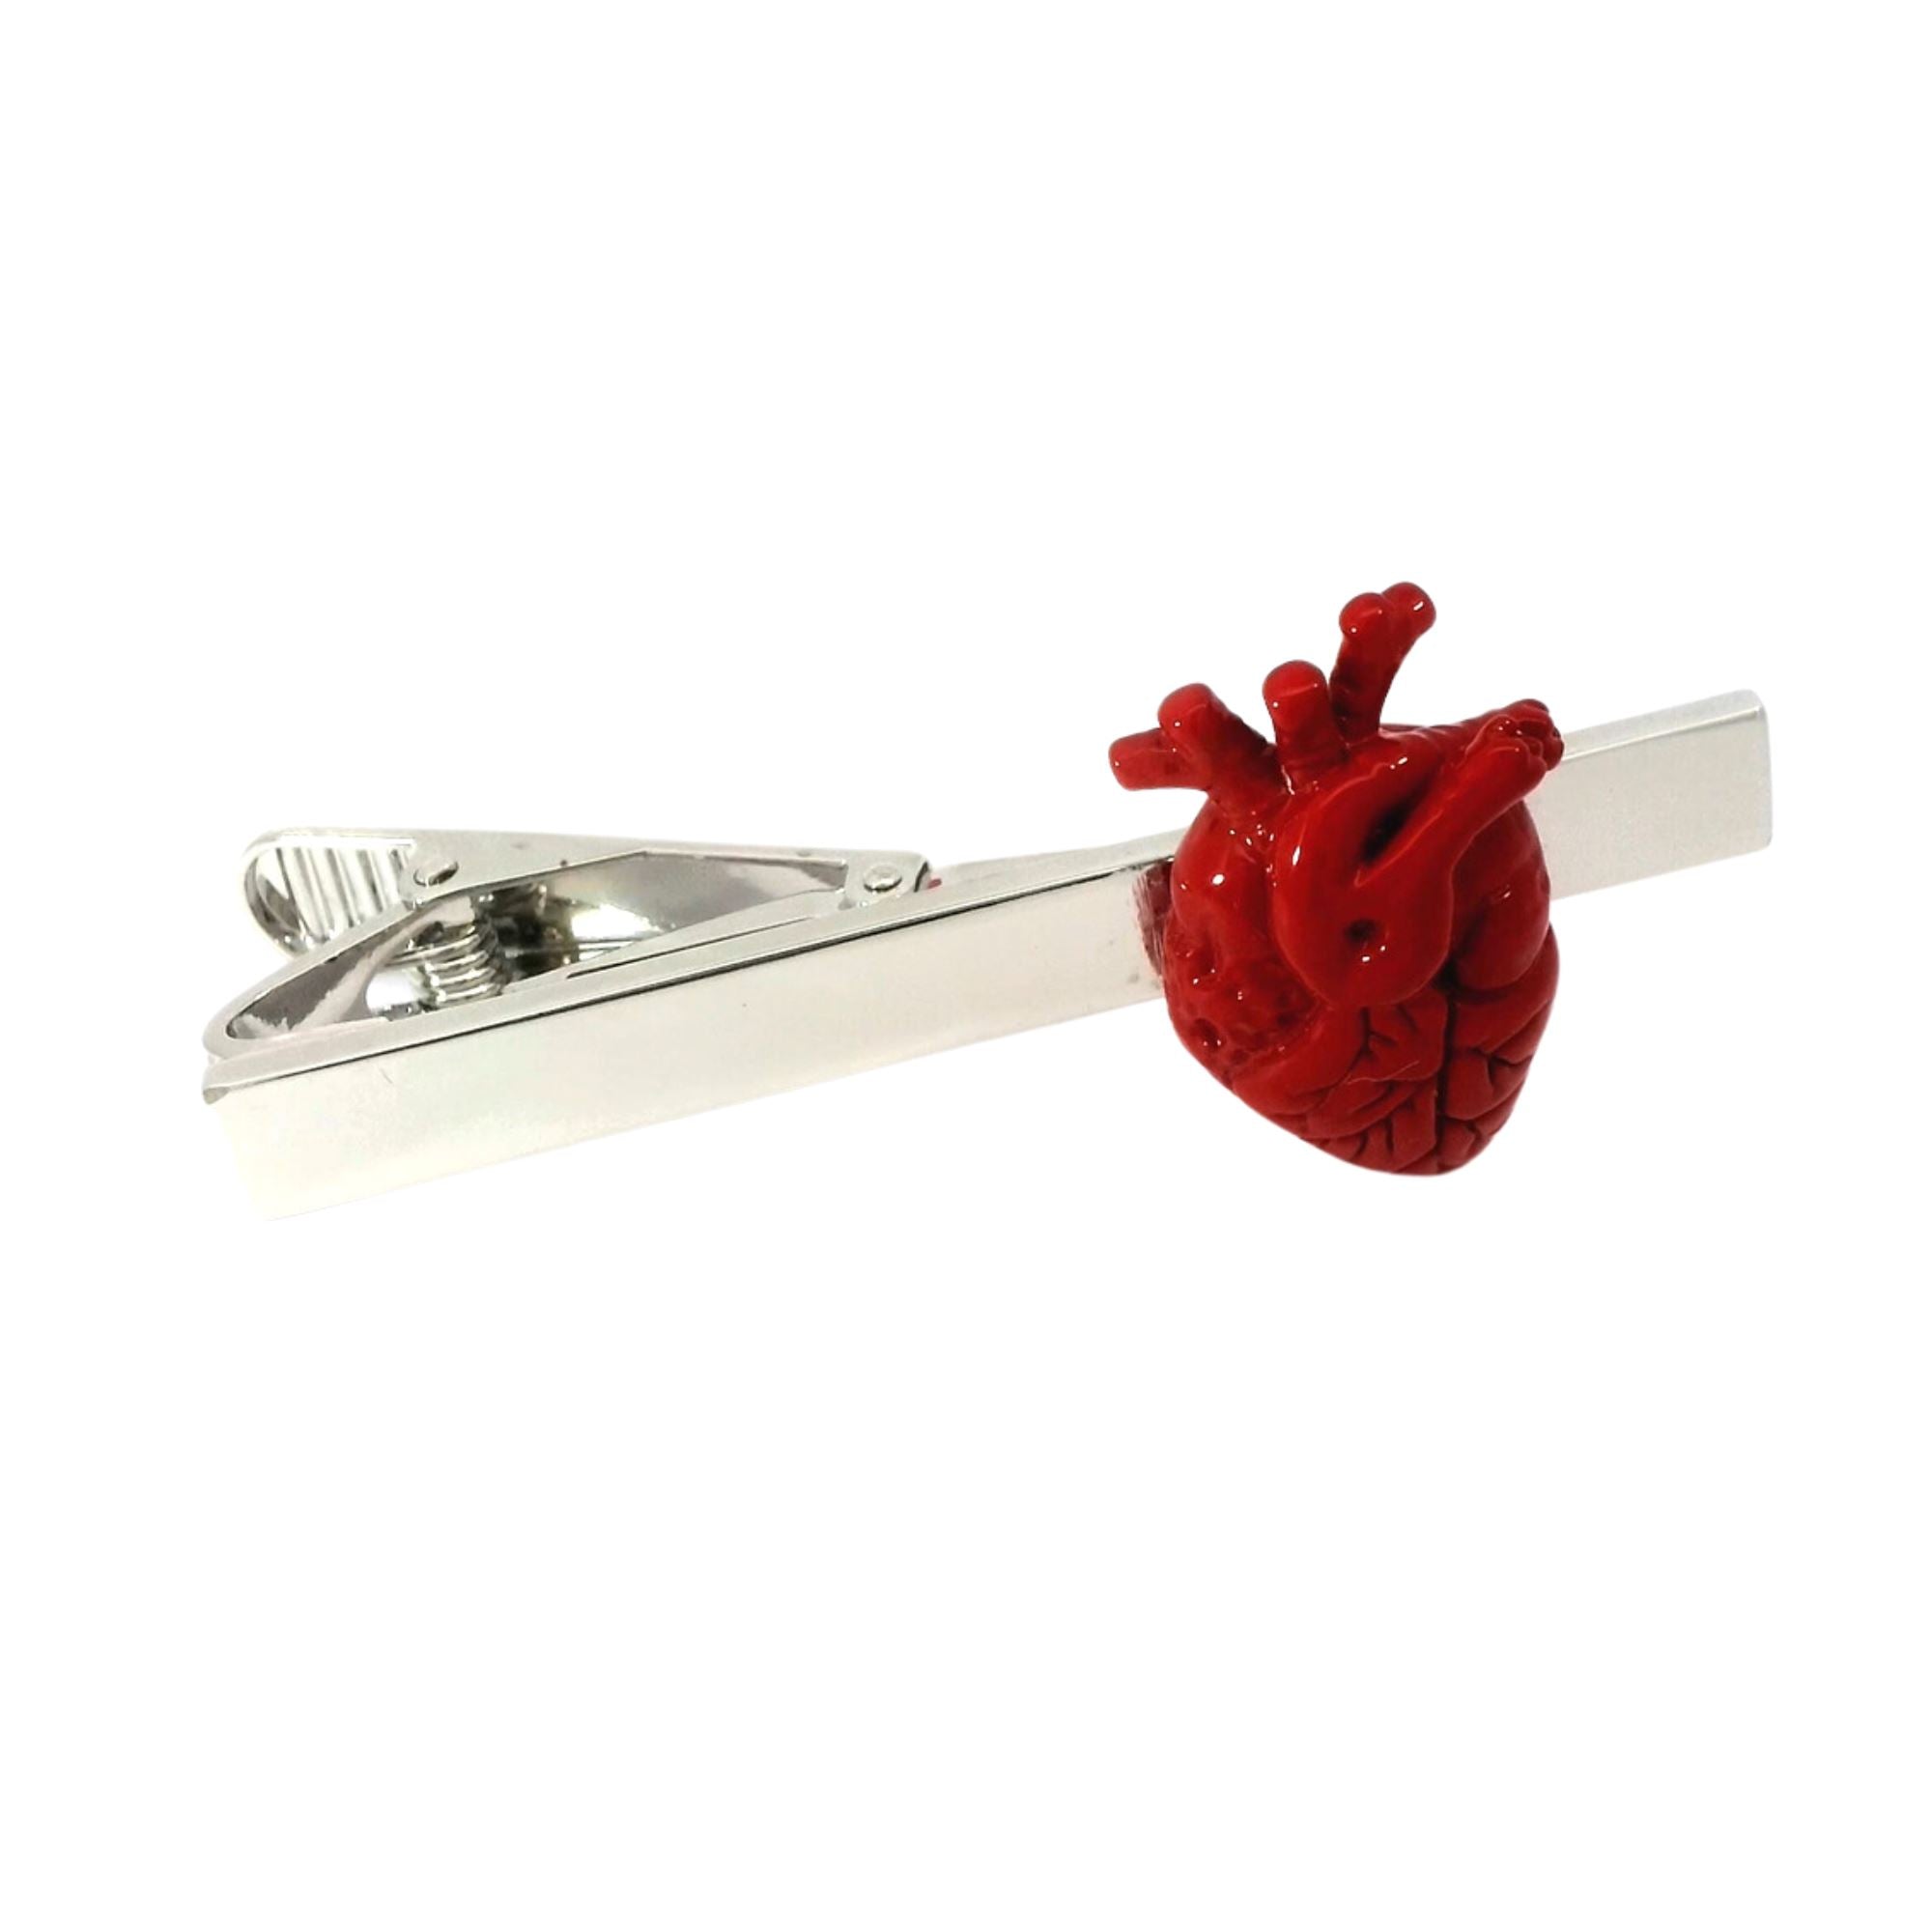 Anatomical Heart Tie Clip Tie Bars Clinks Anatomical Heart Tie Clip 